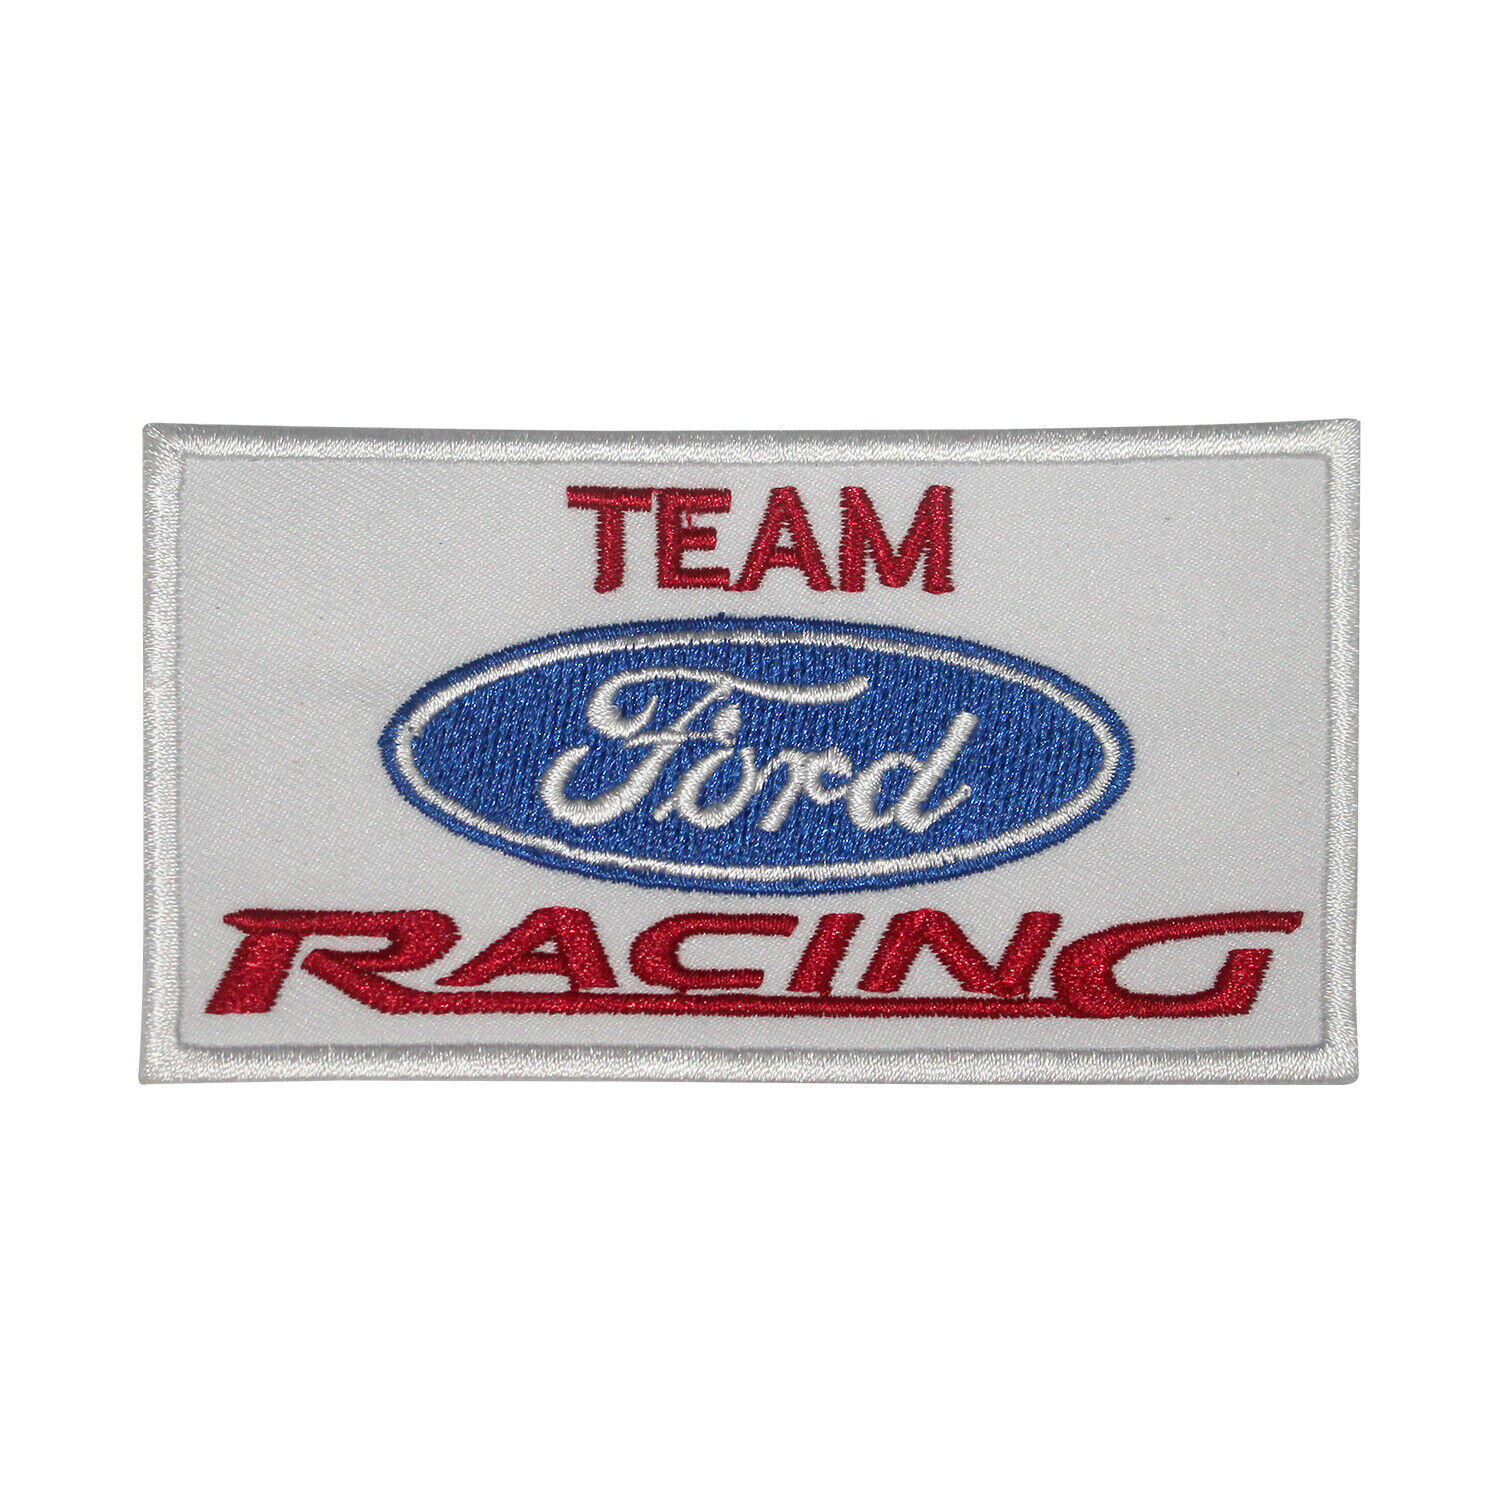 Team Ford Racing Patch Iron On Patch Sew On Badge Patch Embroidery Patch 